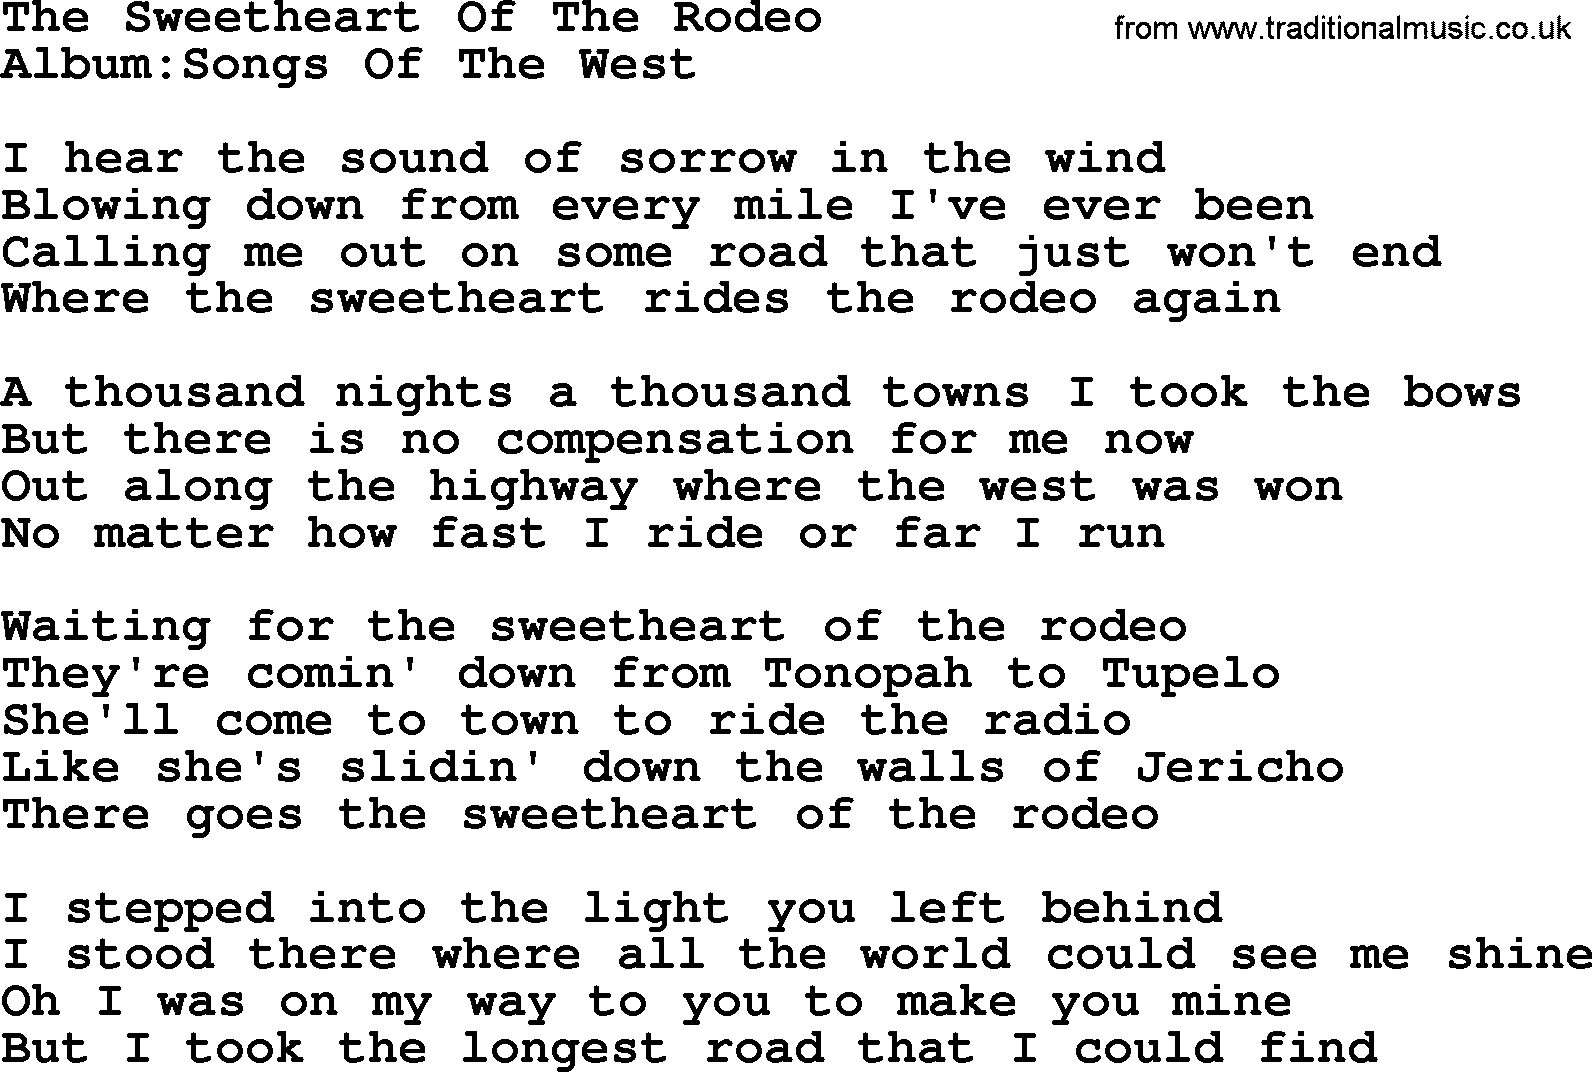 Emmylou Harris song: The Sweetheart Of The Rodeo lyrics